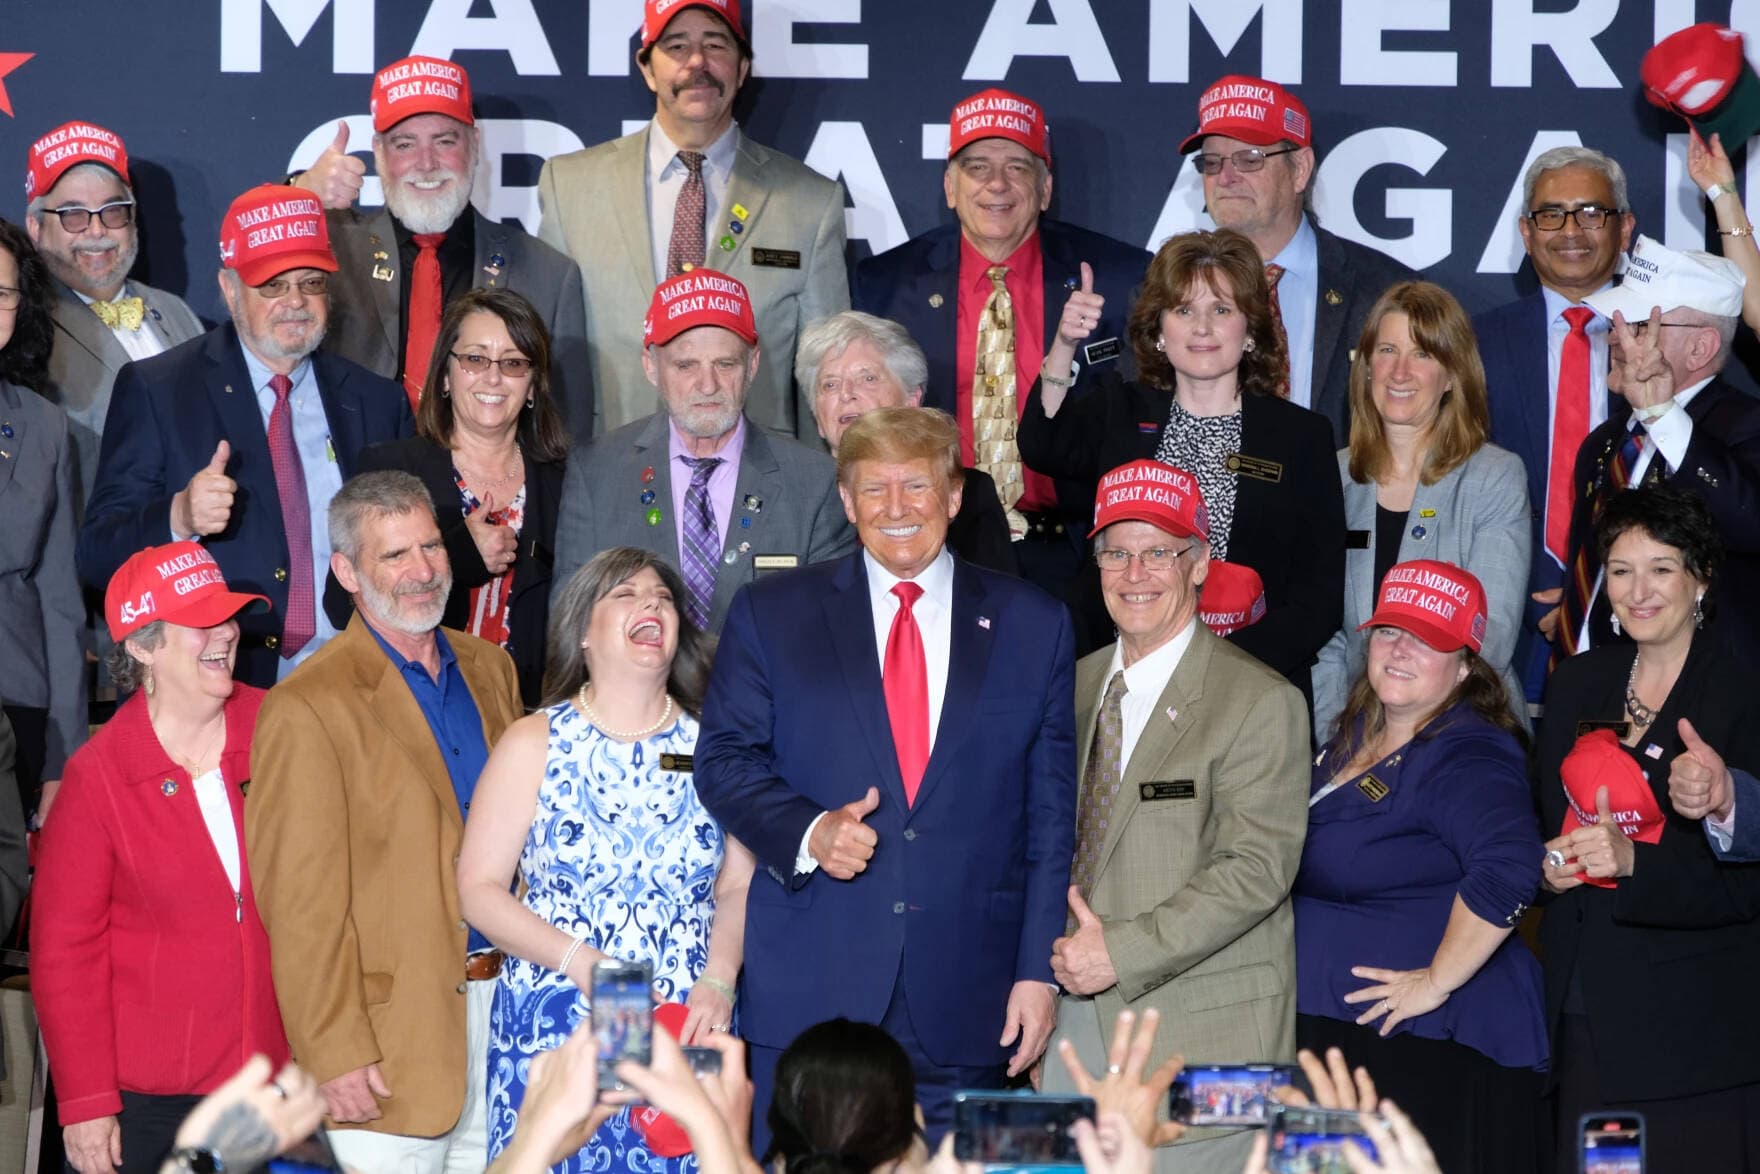 Former President Donald Trump poses with supporters during a rally Thursday in Manchester. (Todd Bookman/NHPR)